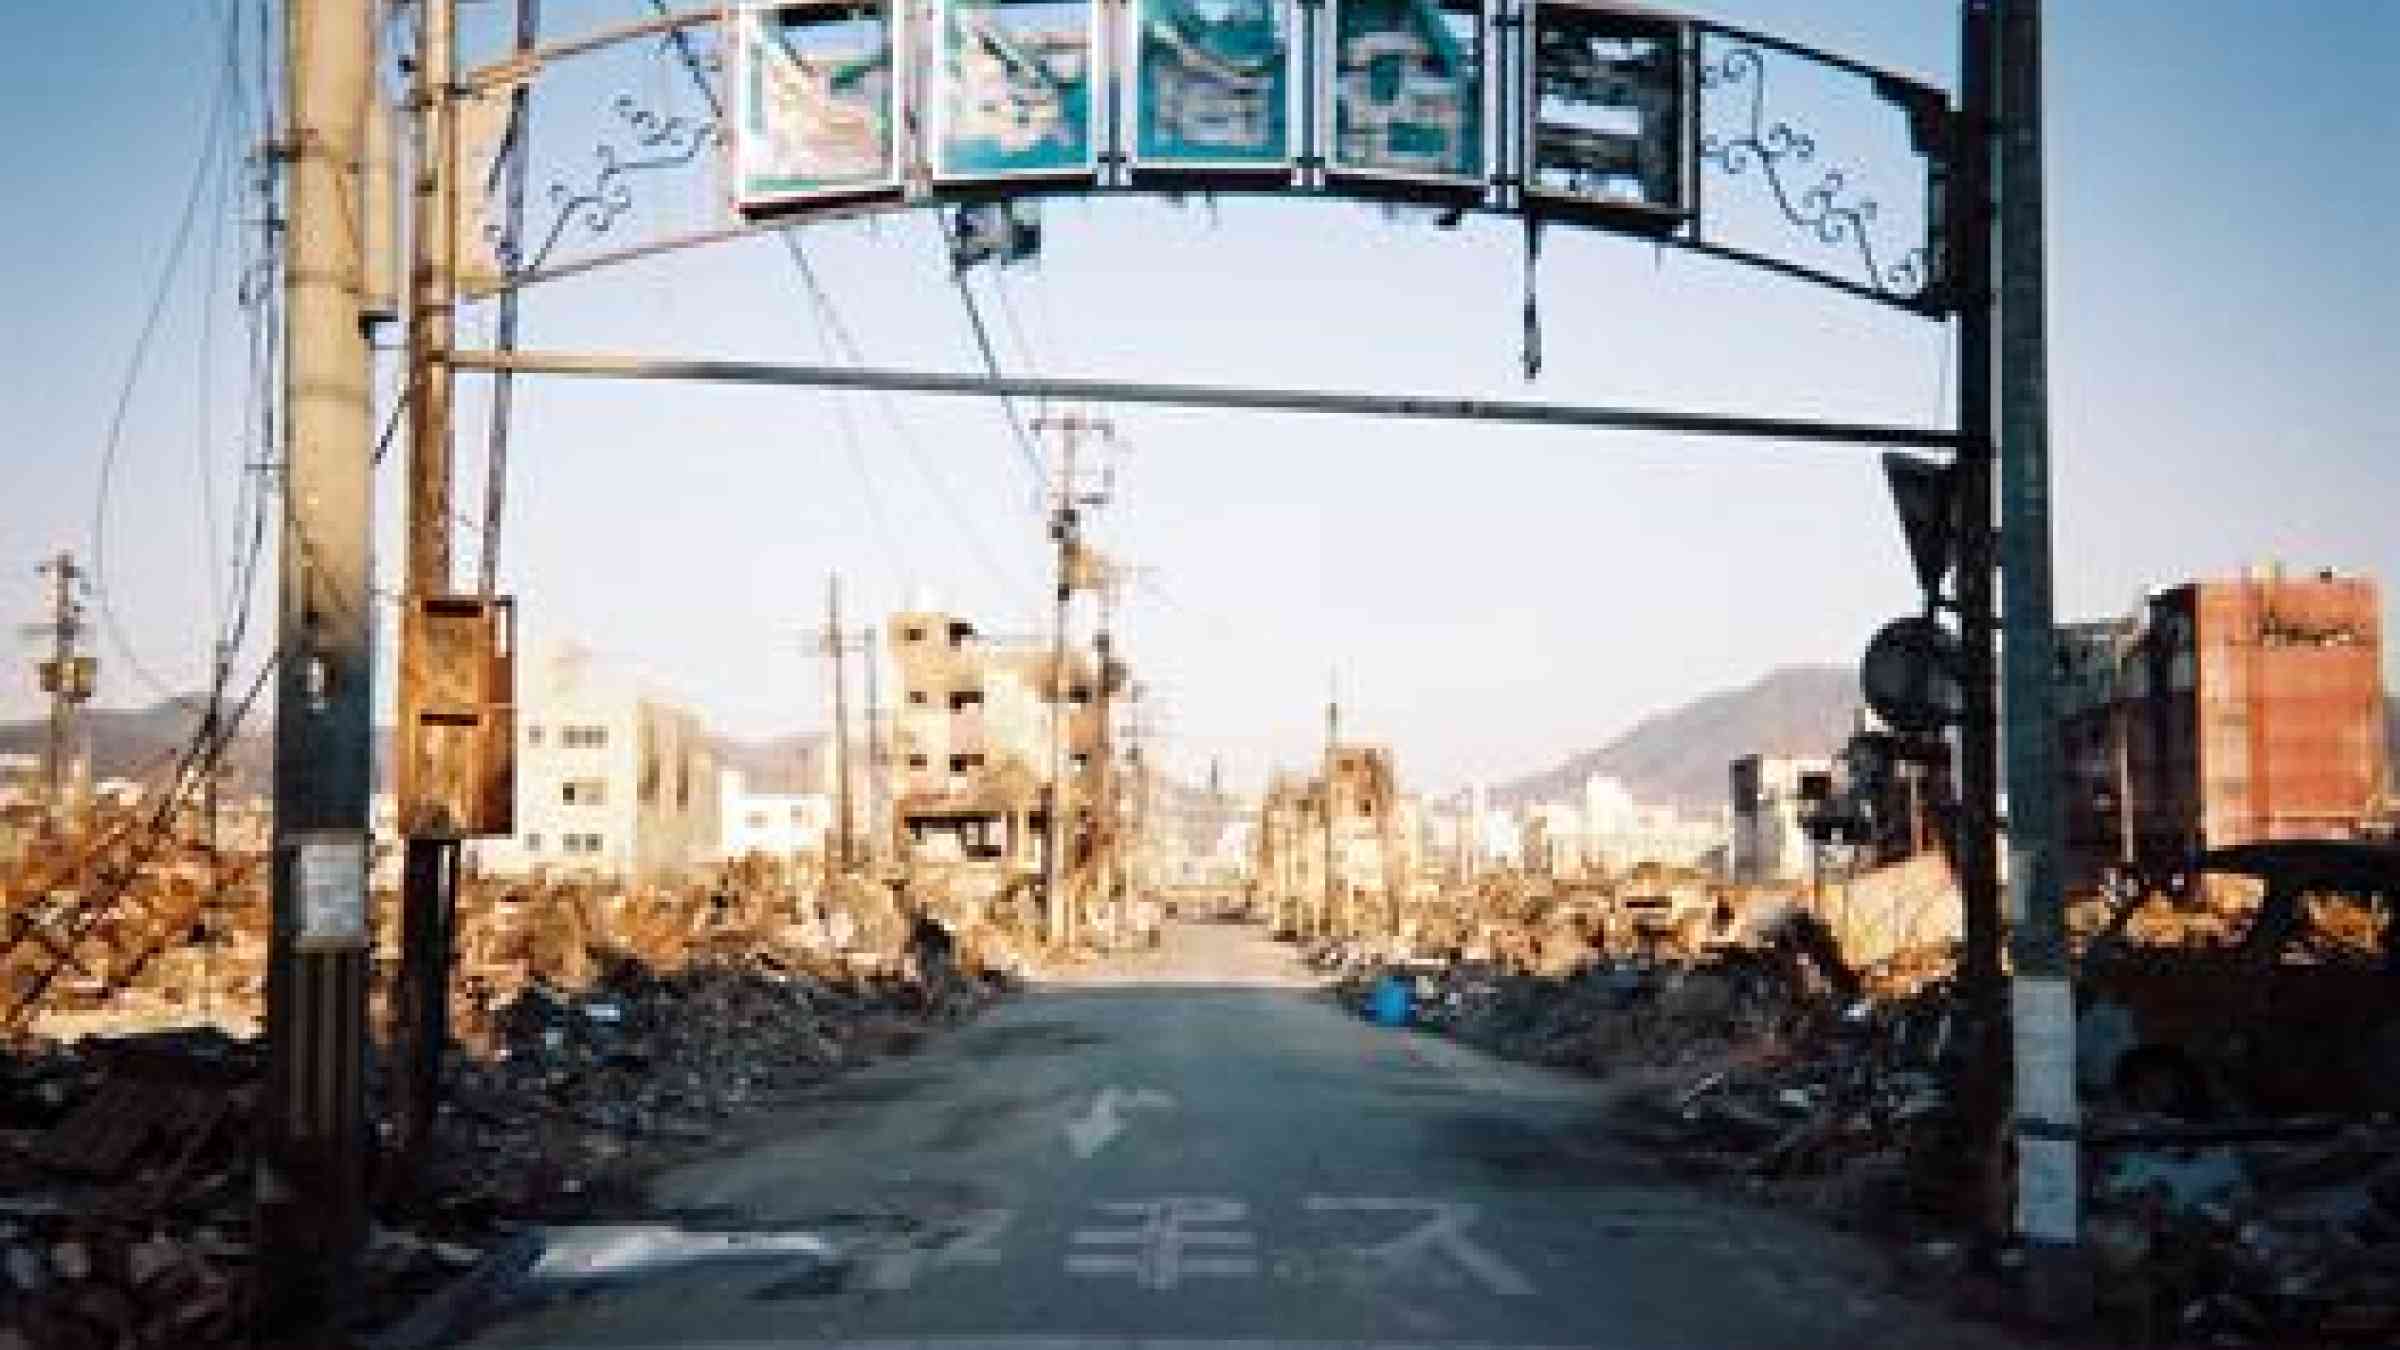 Shopping streets were heavily destroyed in Nagata, Kobe.